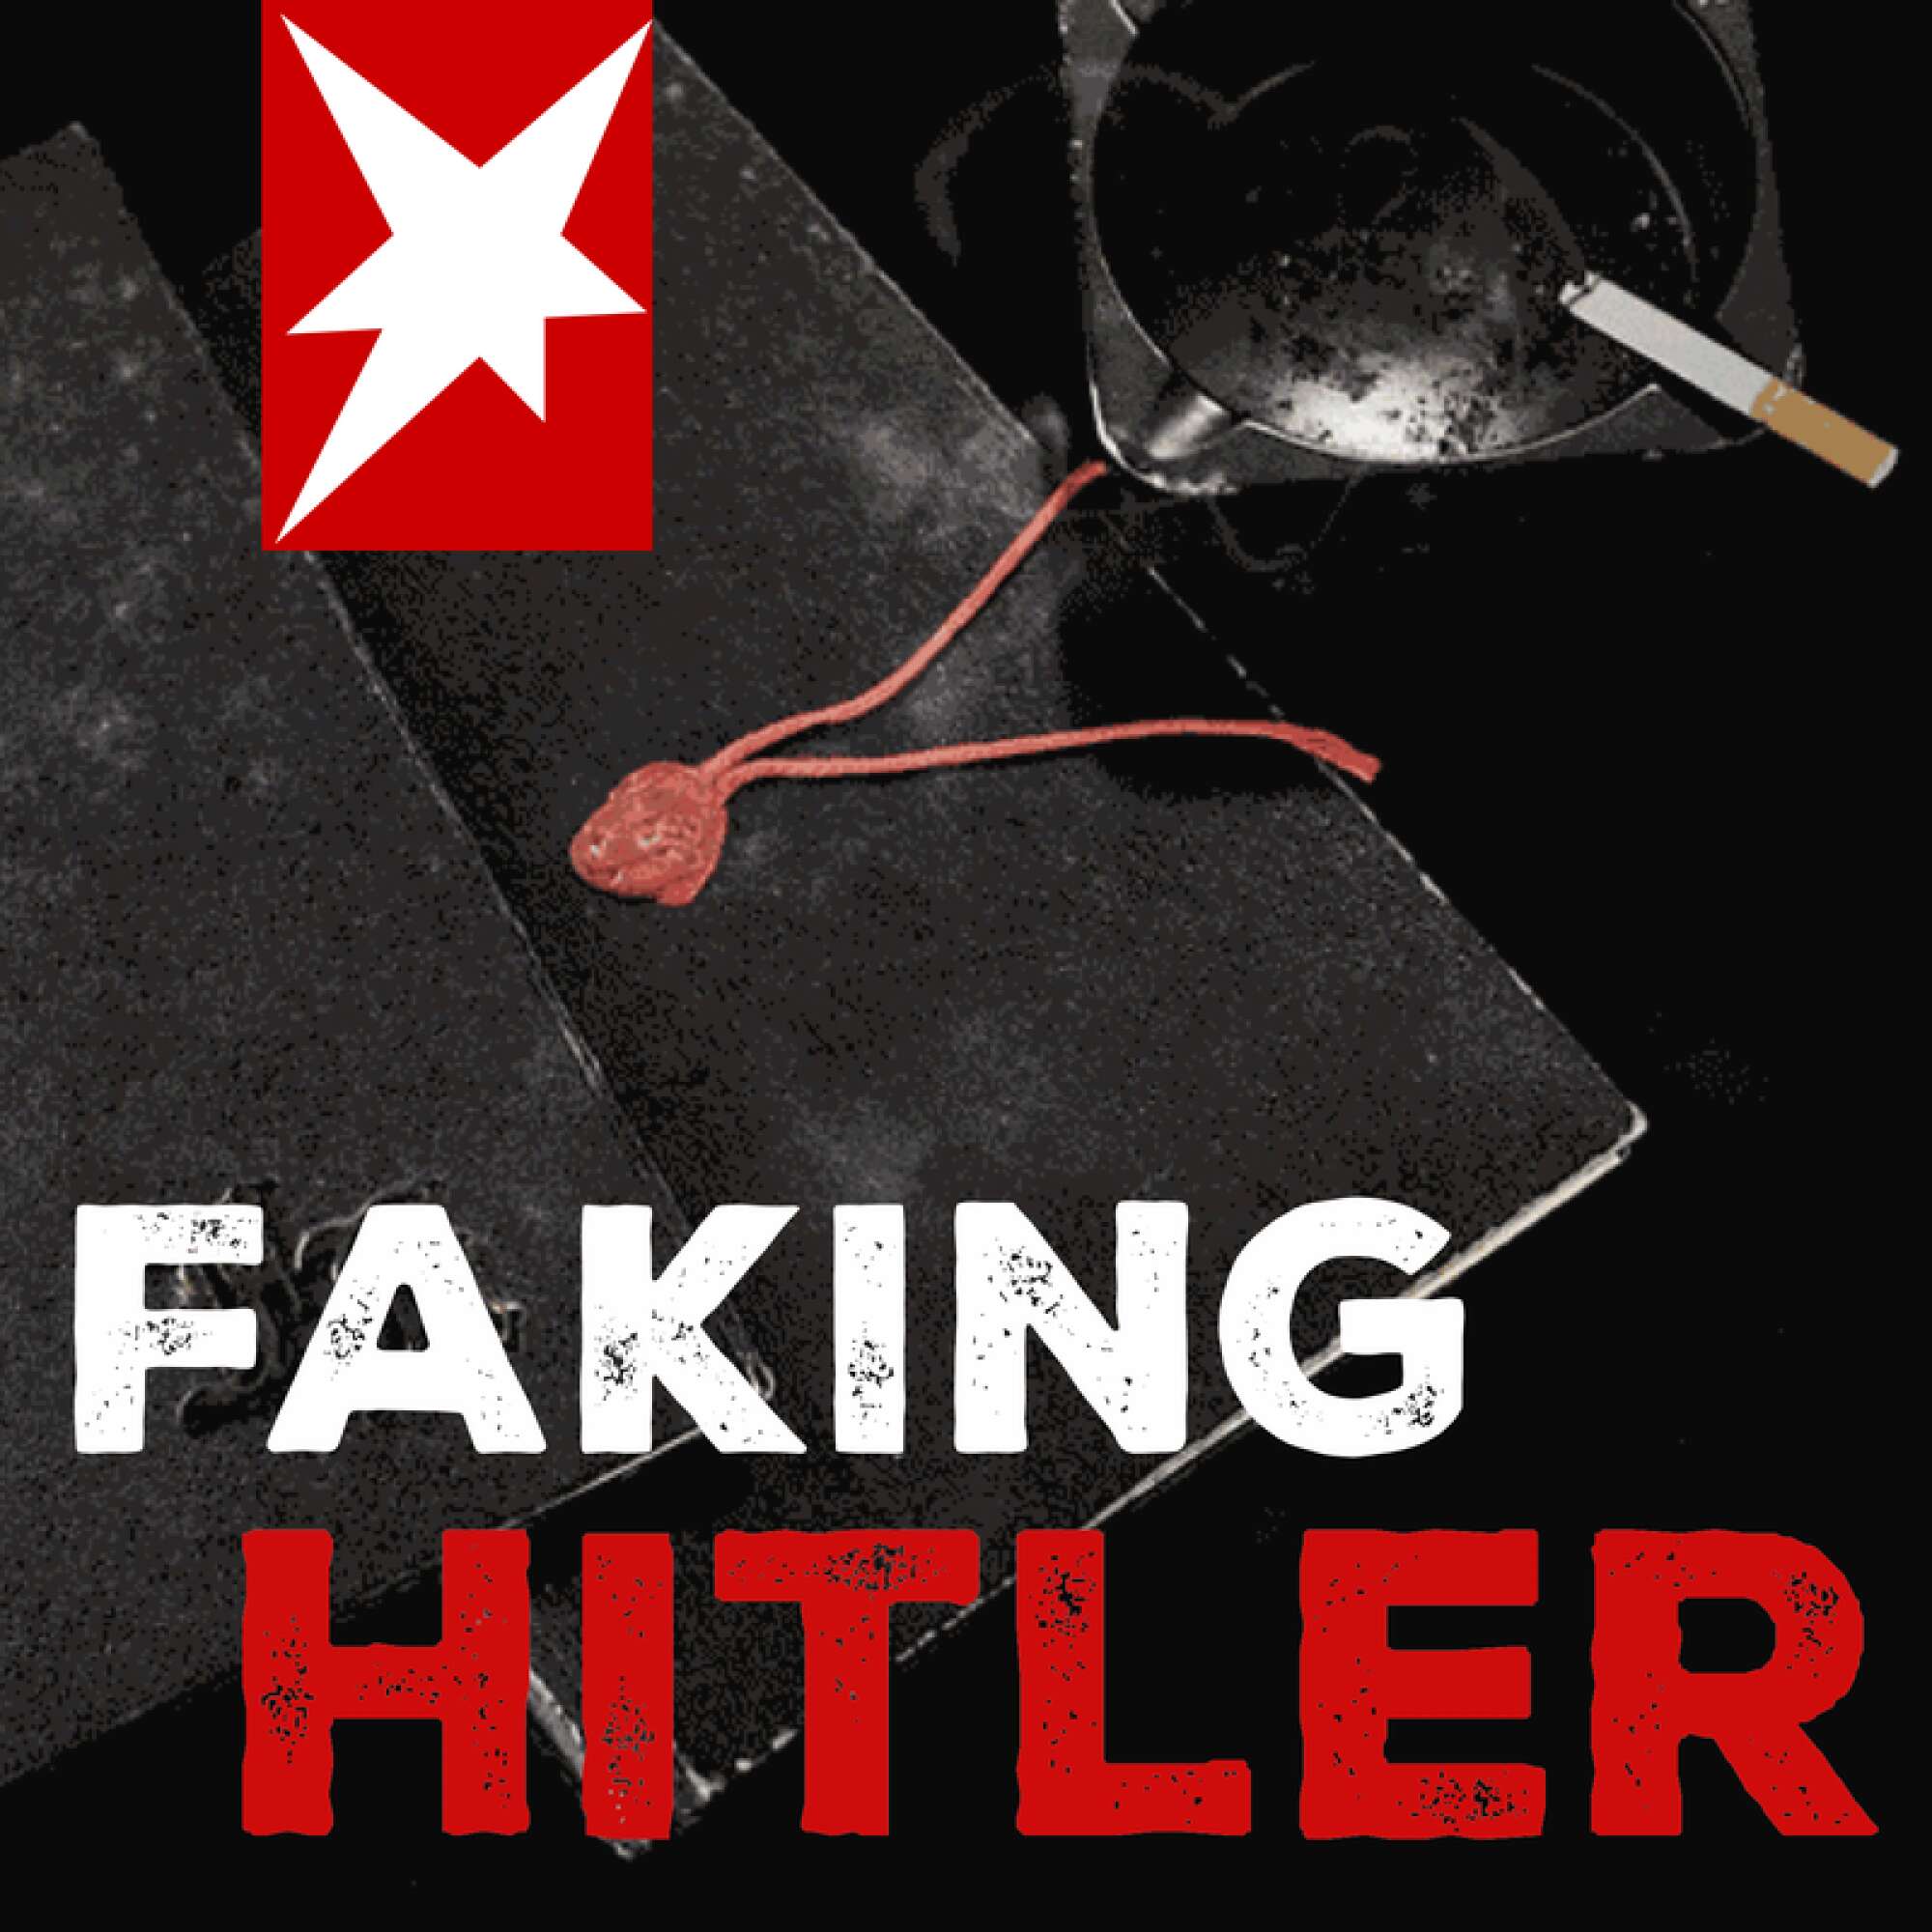 Podcast-Cover "Faking Hitler"